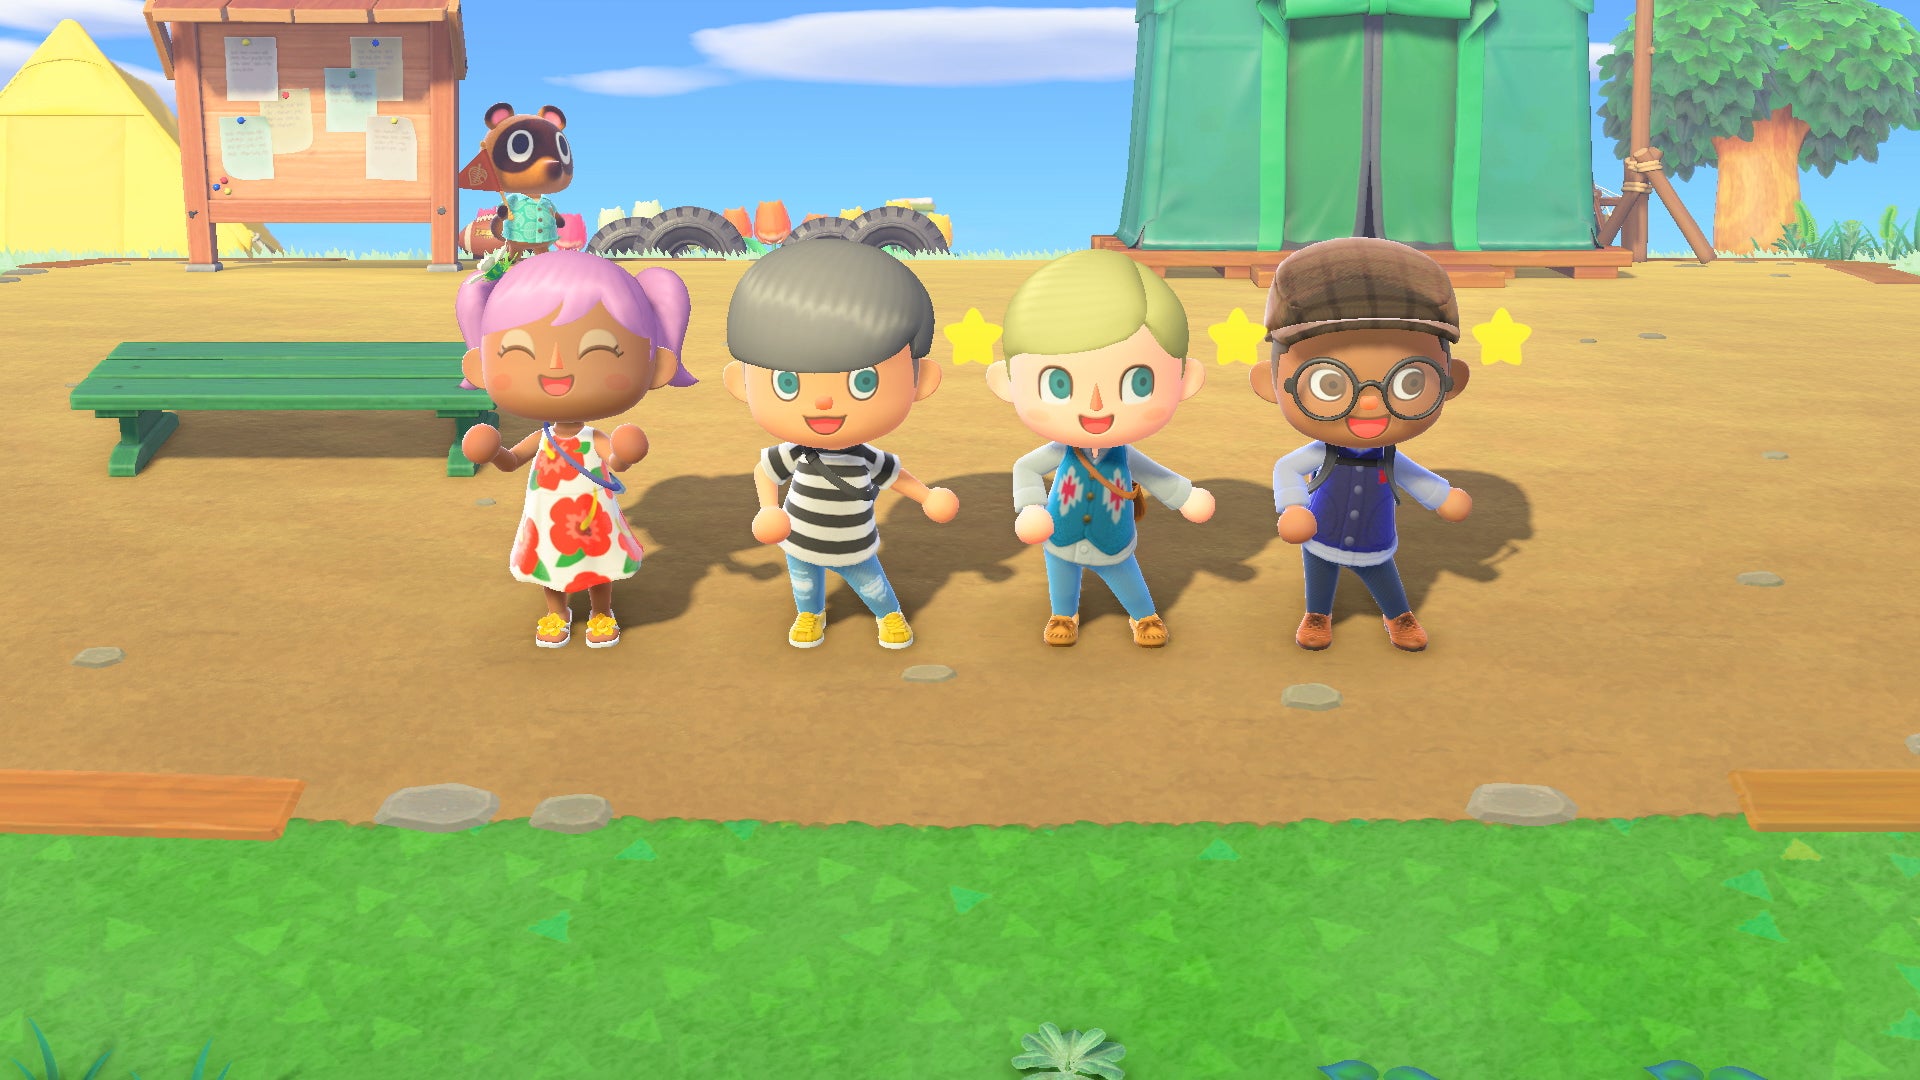 Image for Animal Crossing: New Horizons Might Have Genders After All Among Other New Details From PAX East